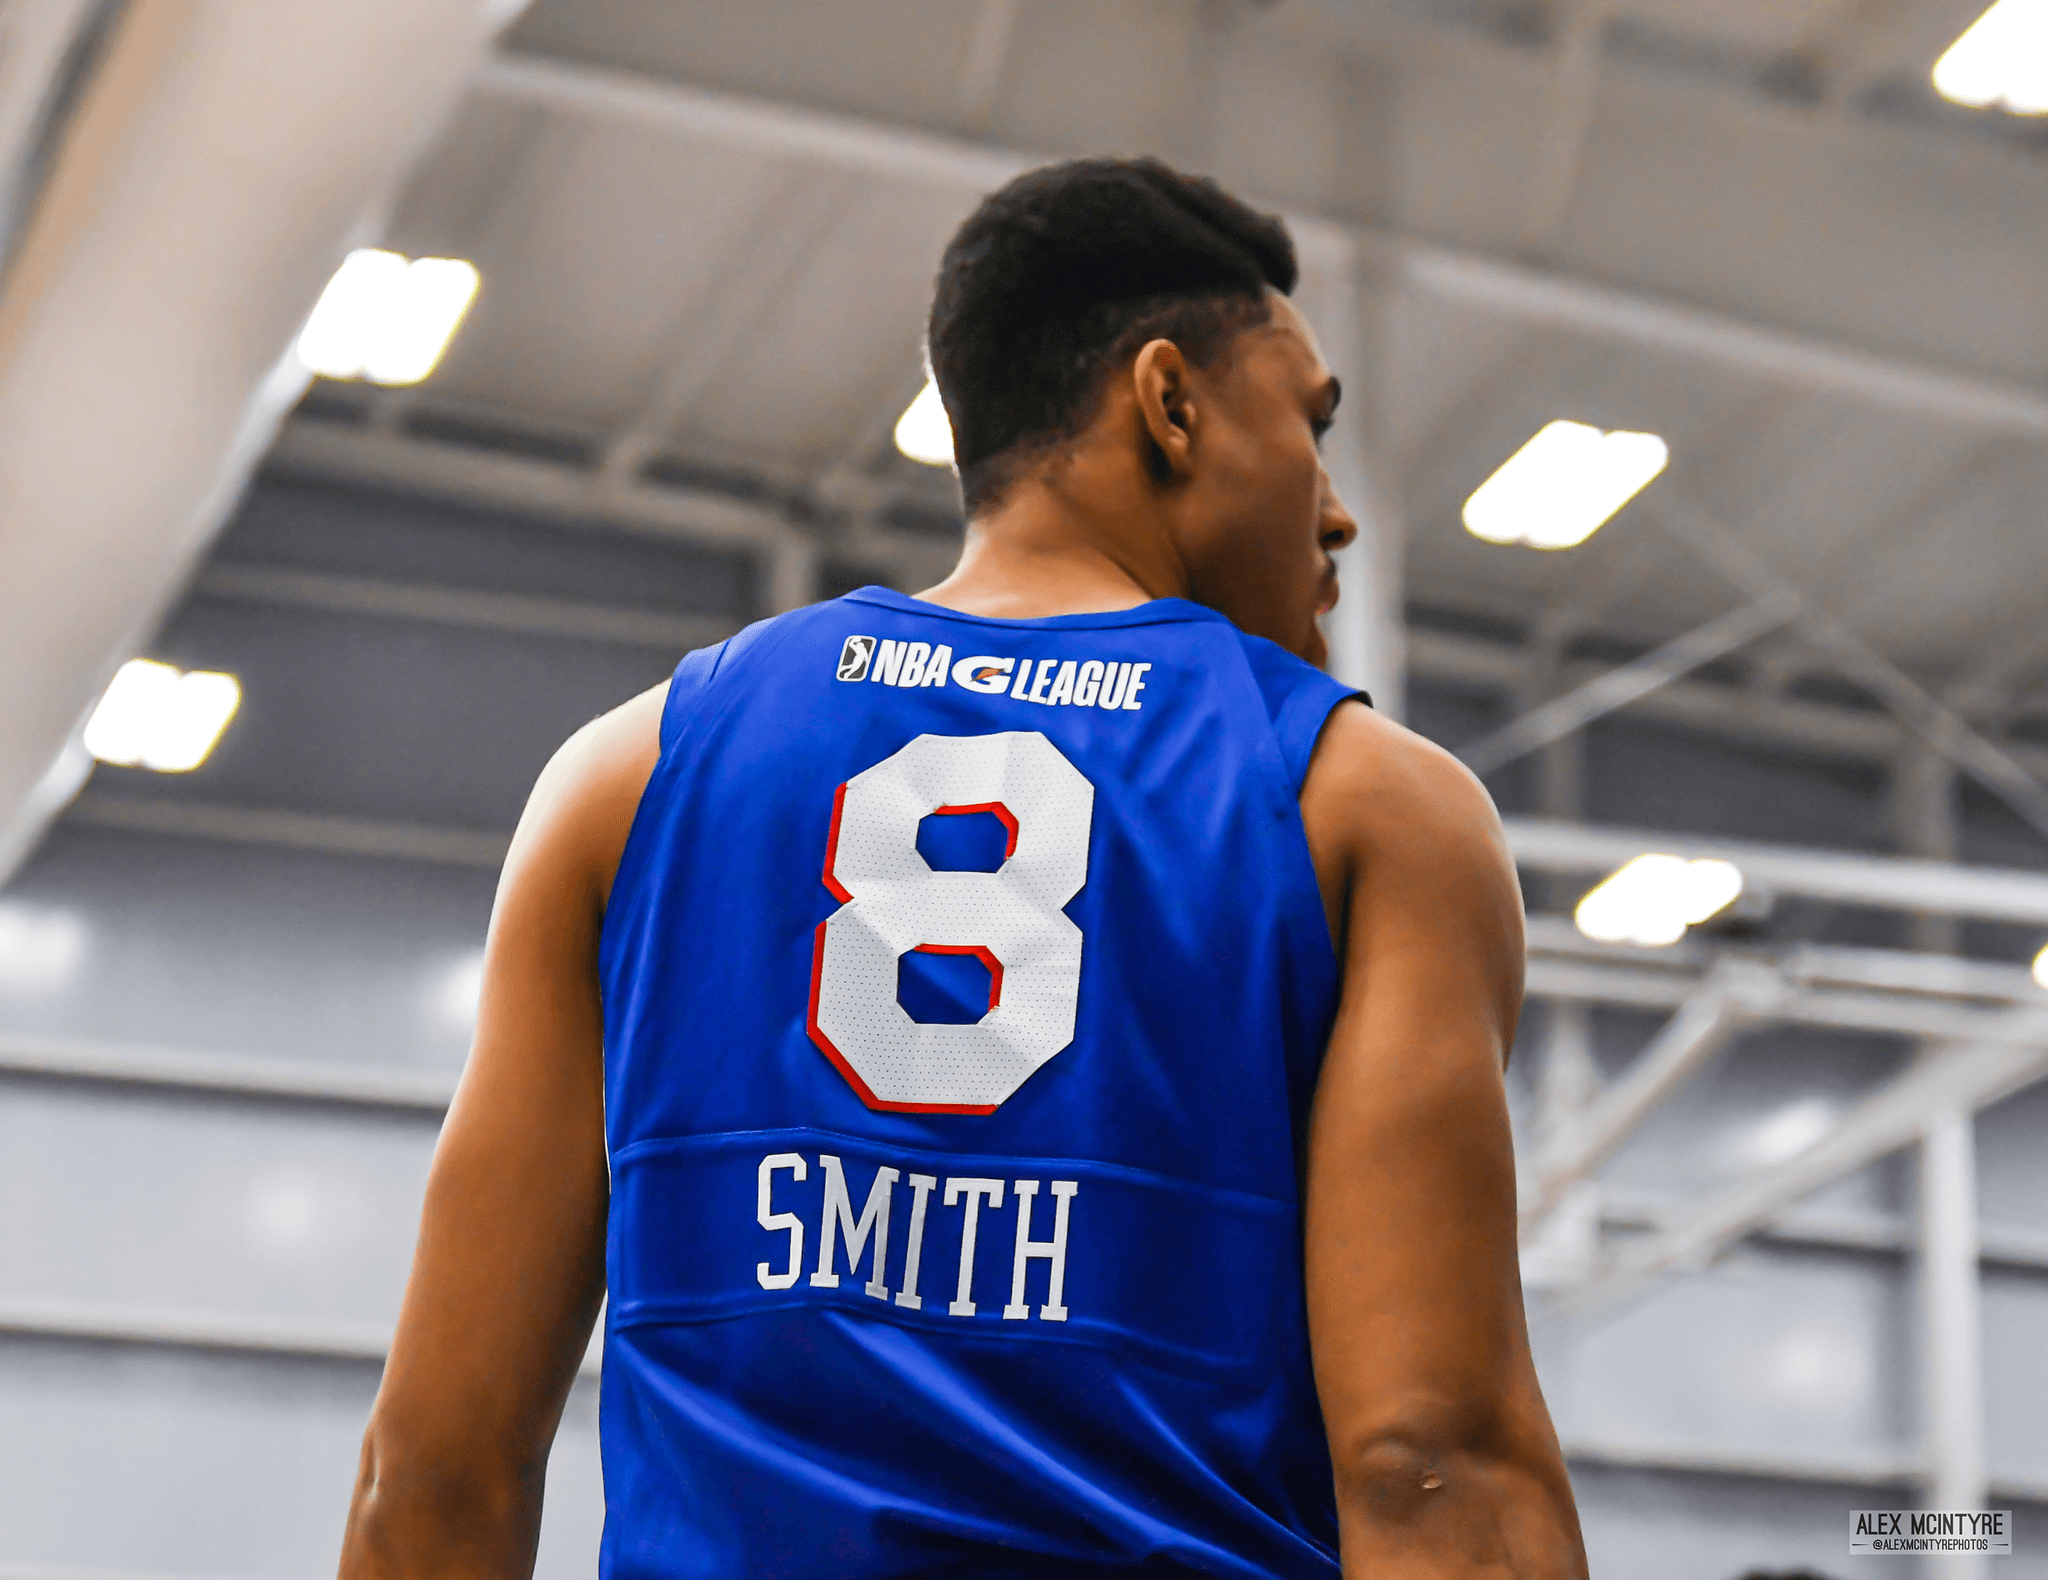 Sixers' Zhaire Smith has come a long way back from injury and illness,  motivated by his father